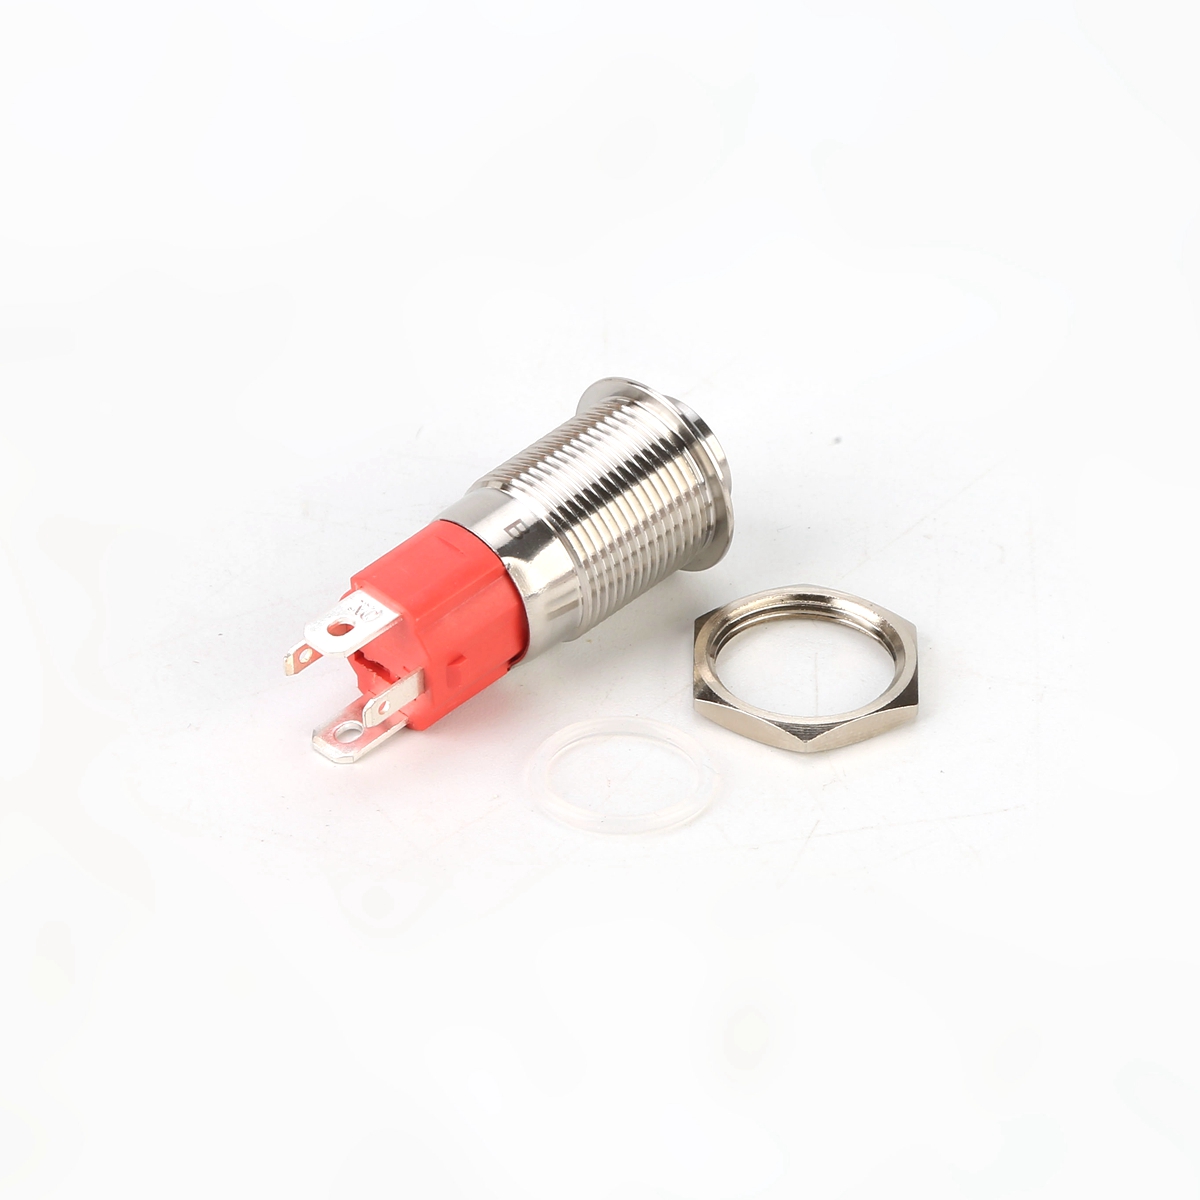 16MM-10A-250V-12V-4Pin-LED-Light-Button-Switch-Momentary-Reset-Metal-Push-Button-Switch-1493146-4